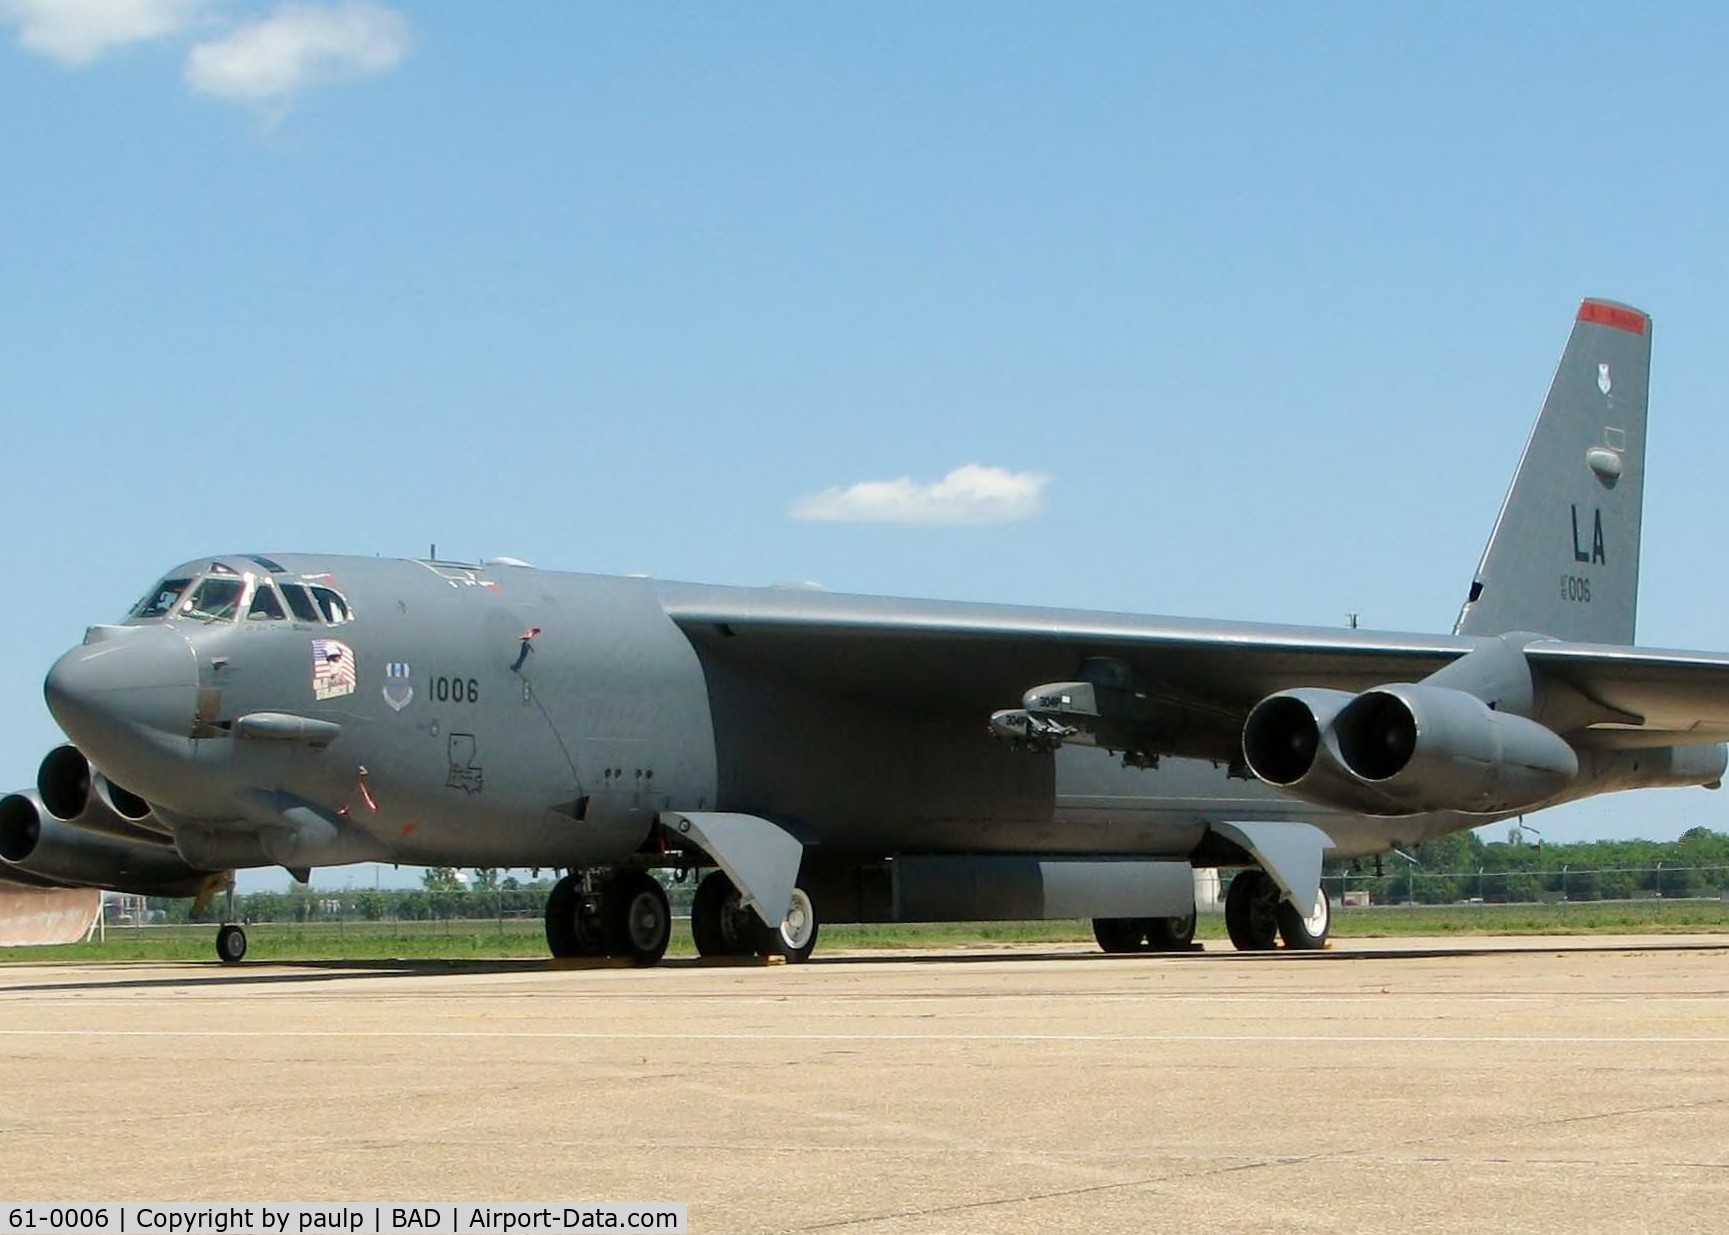 61-0006, 1961 Boeing B-52H Stratofortress C/N 464433, At Barksdale Air Force Base.